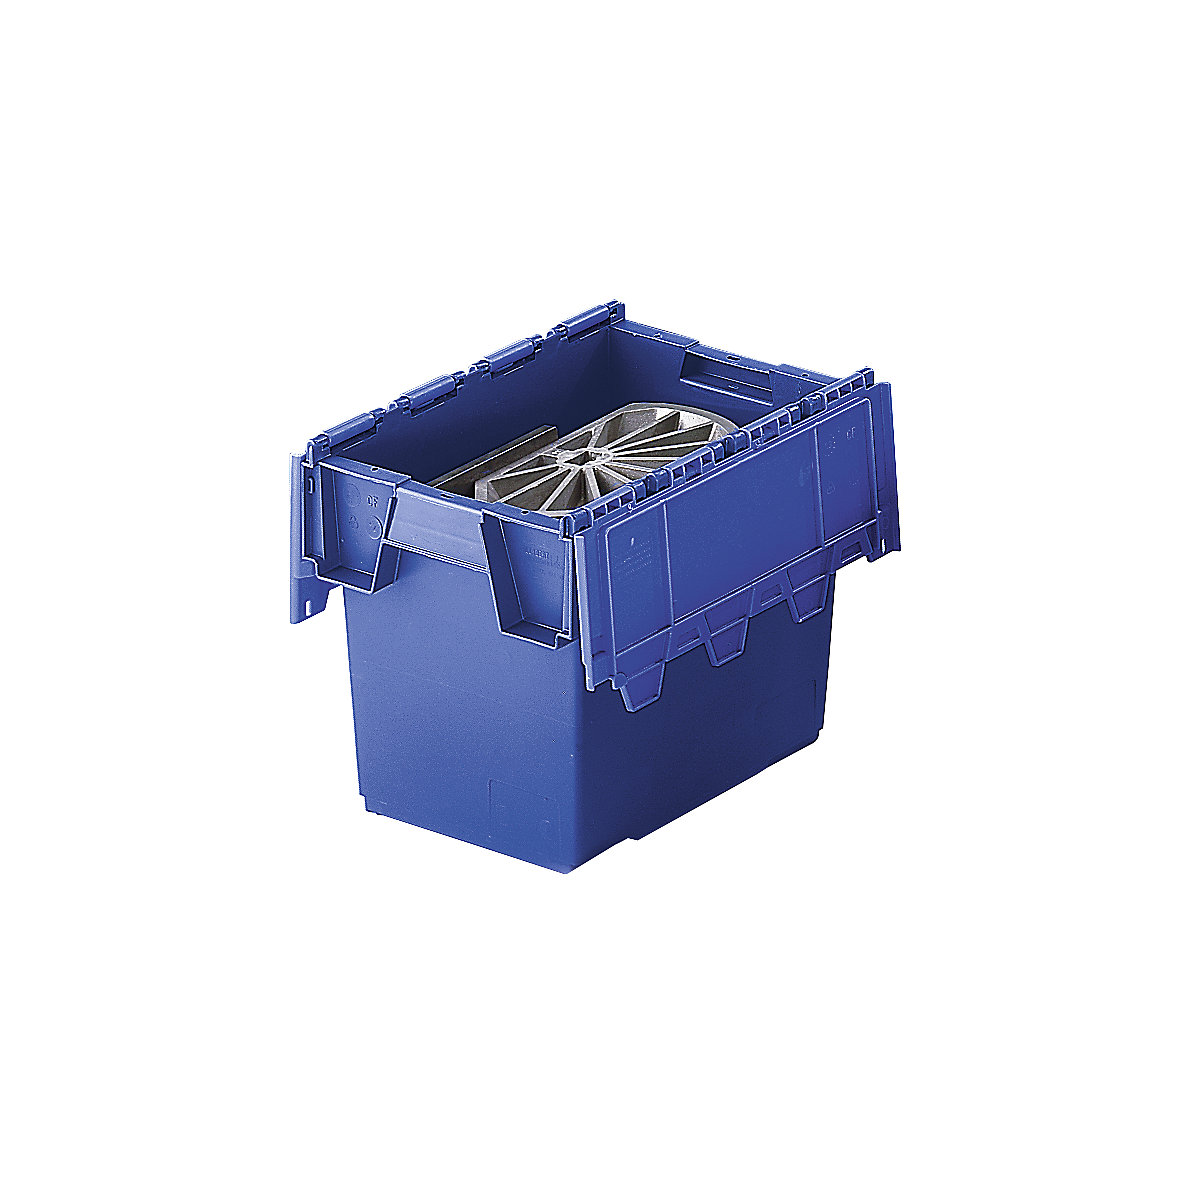 KAIMAN reusable stacking container, capacity 25 litres, LxWxH 400 x 300 x 320 mm, blue